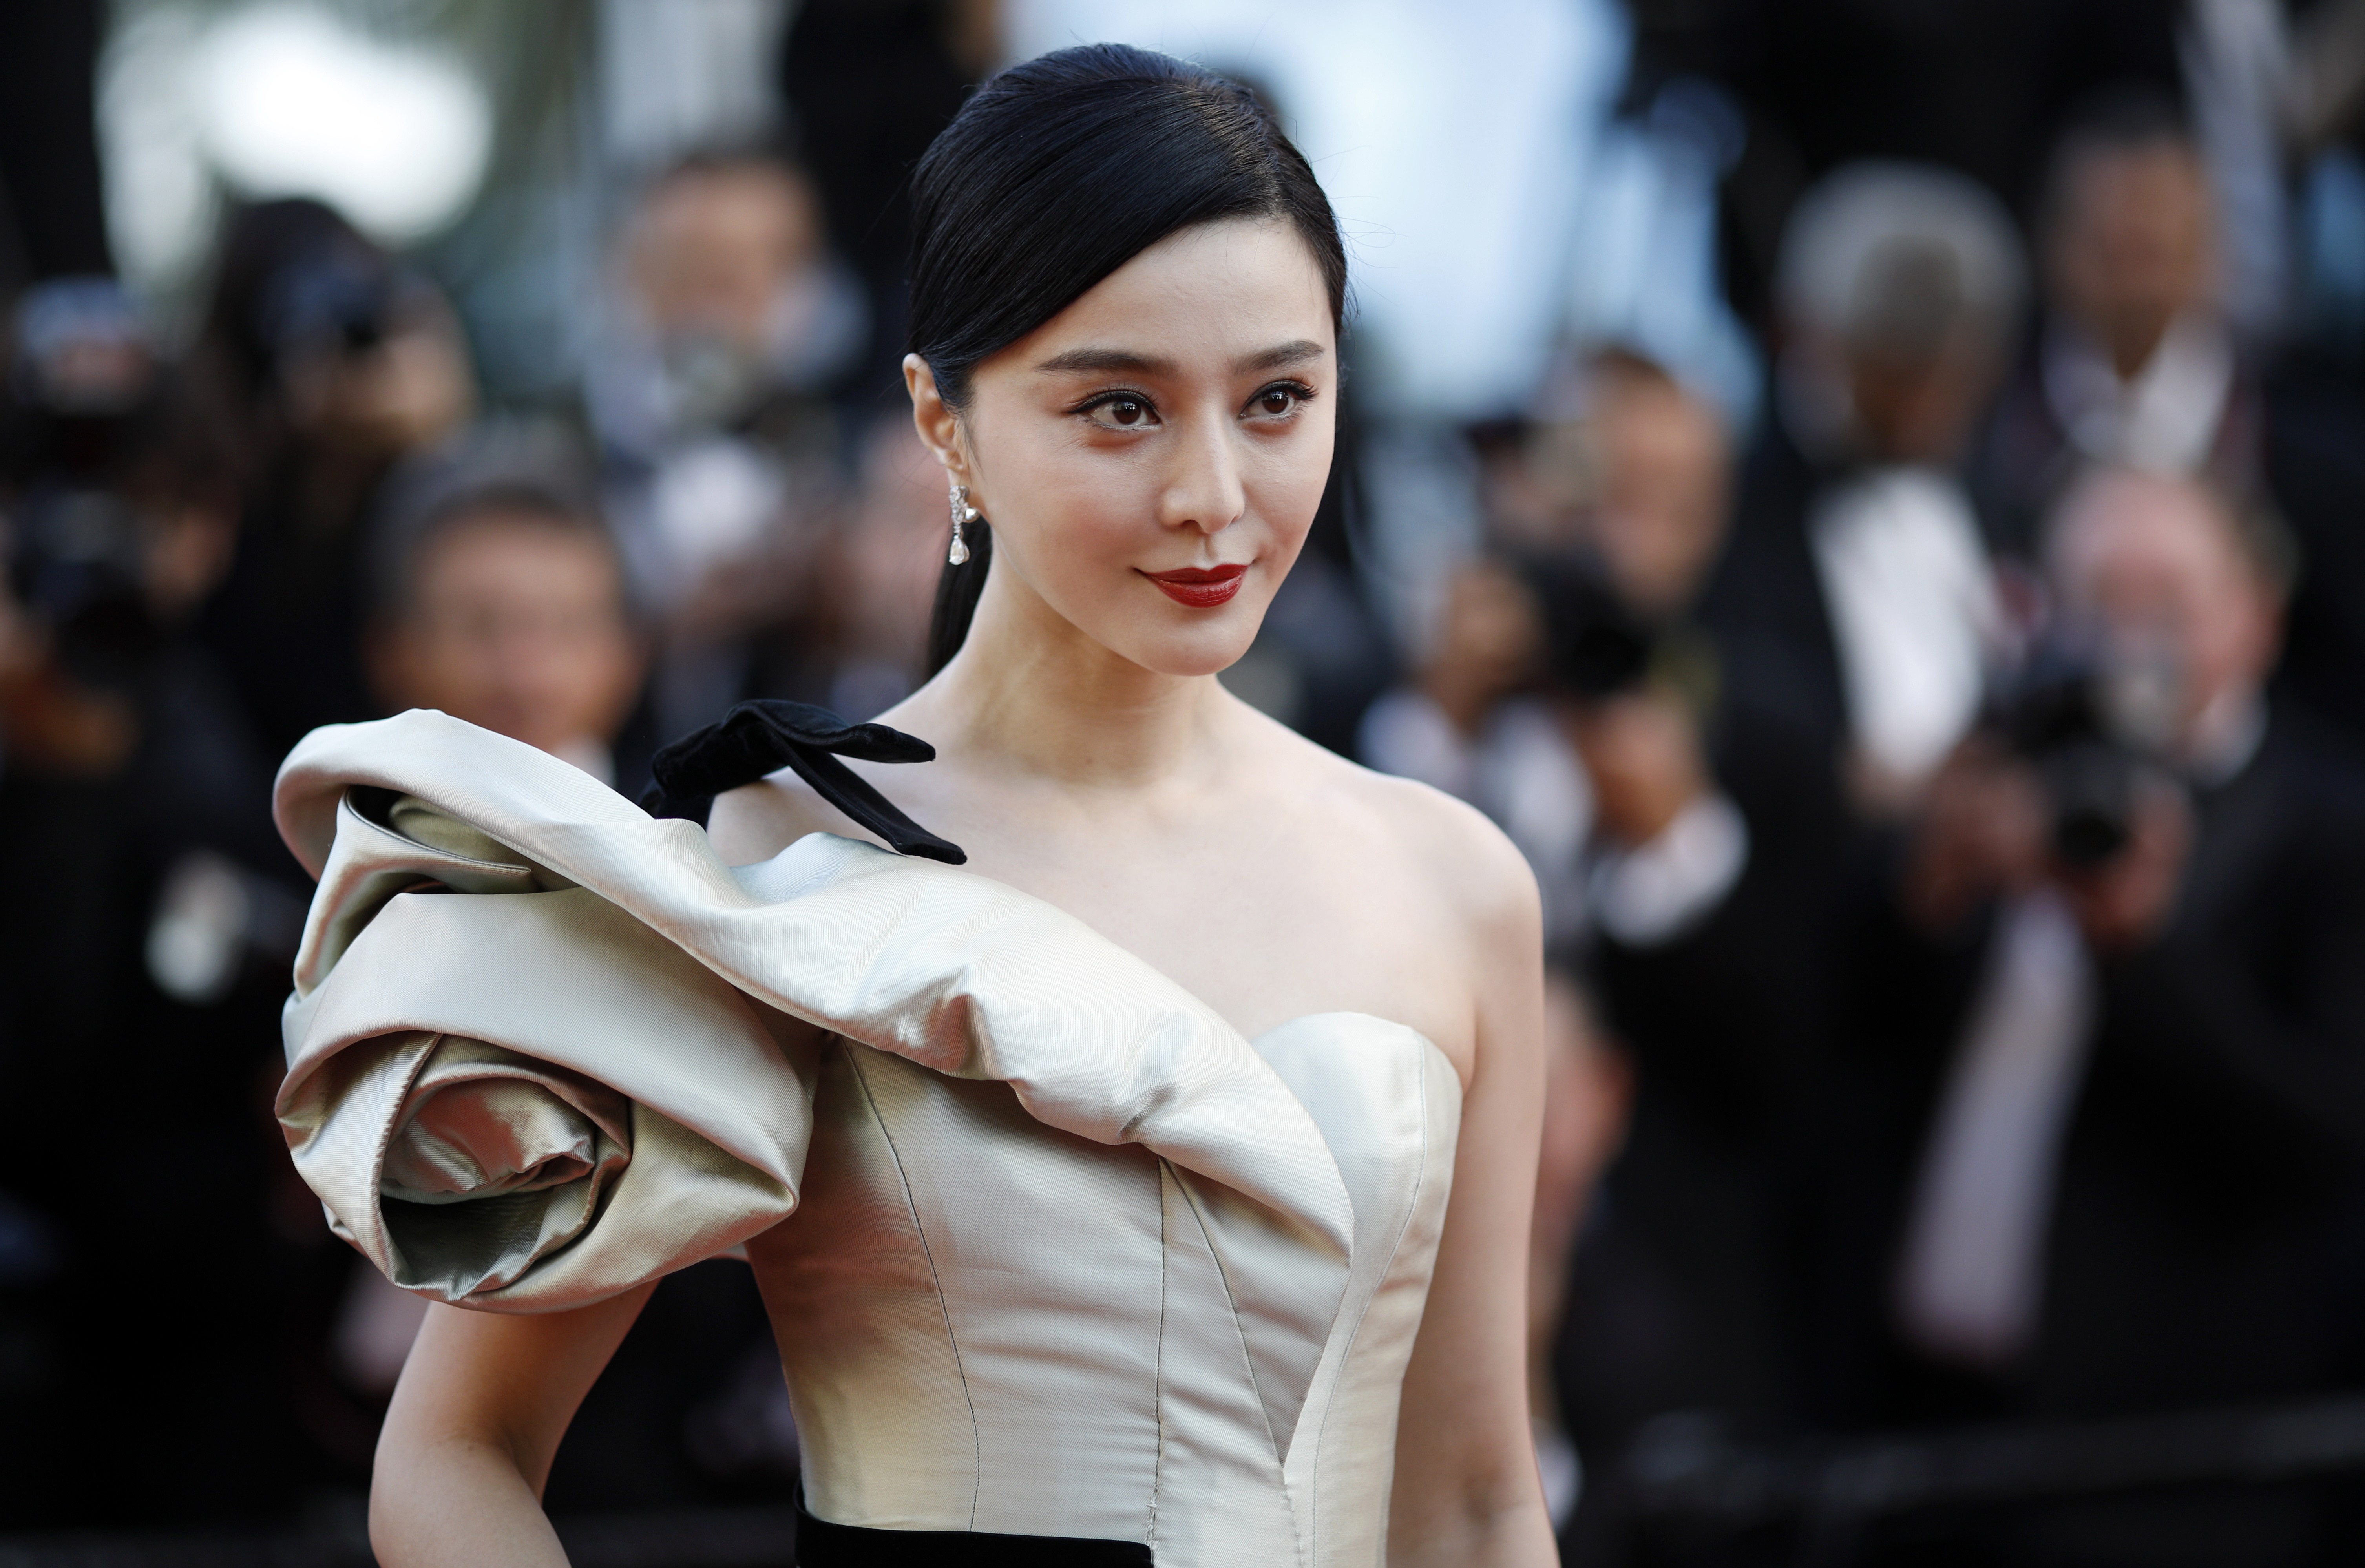 Actress Fan Bingbing was ordered to pay fines of nearly US$129 million for tax evasion. Photo: EPA